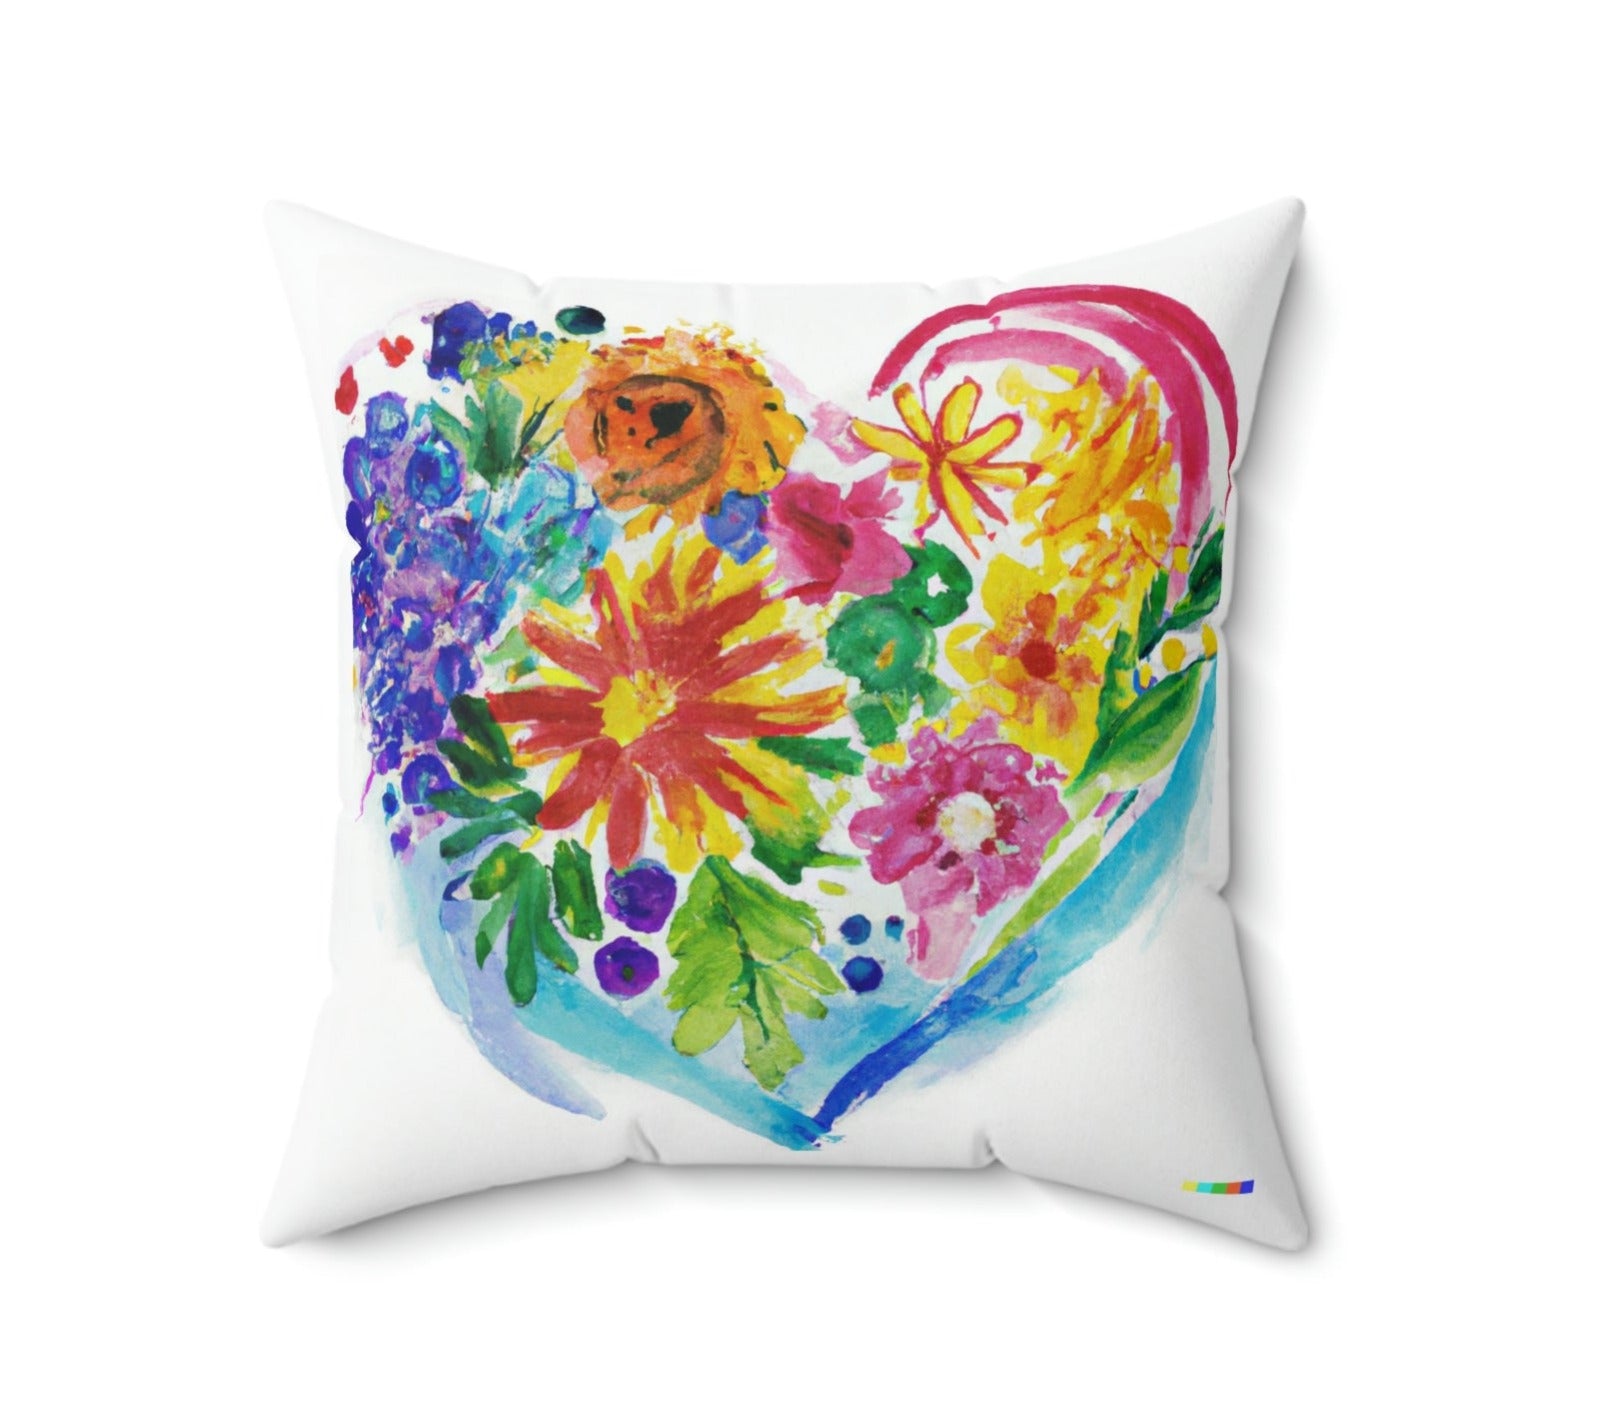 Your Valentine's sweetheart will love this Beautiful Heart Spun Polyester Square Pillow with a cool heart design on both sides.  She can choose the heart she loves the most to display.  Room accents shouldn't be underrated. These beautiful indoor pillows in various sizes serve as statement pieces, creating a personalized environment.